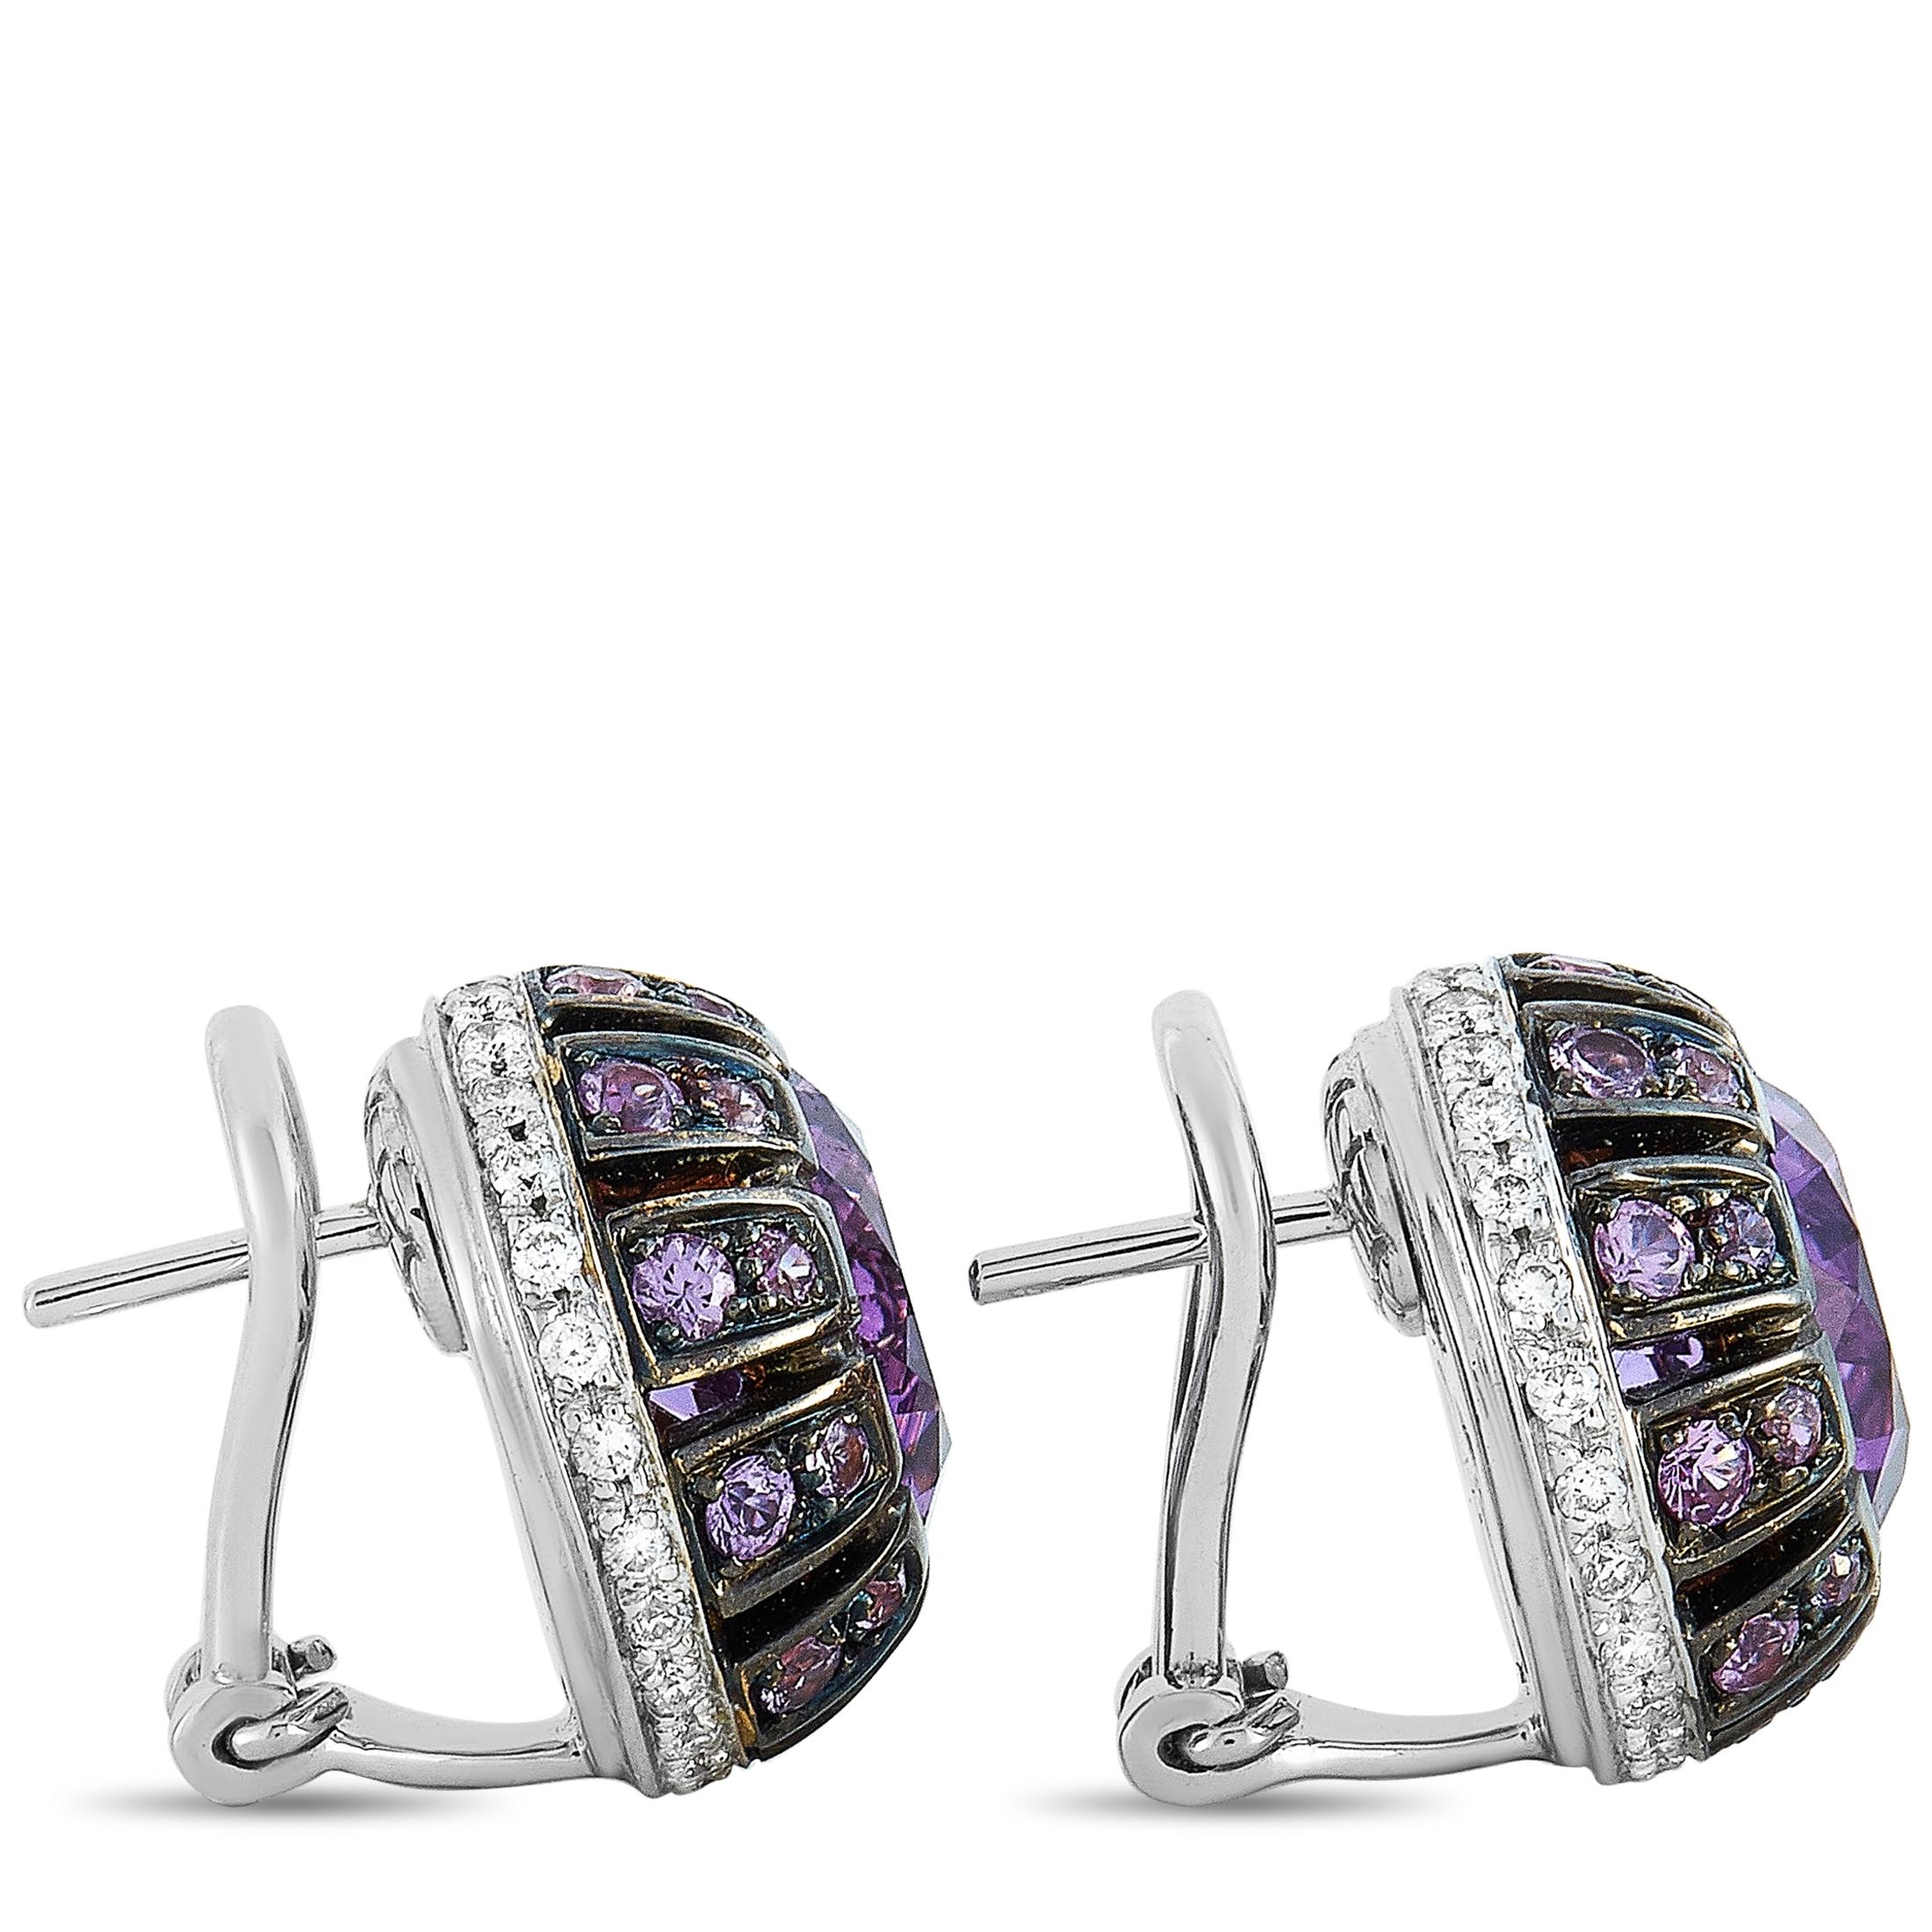 These Oro Trend earrings are made of 18K white gold and embellished with amethysts, a total of 0.45 carats of diamonds, and 1.06 carats of purple sapphires. The earrings measure 0.60” in length and 0.60” in width and each of the two weighs 7 grams.
